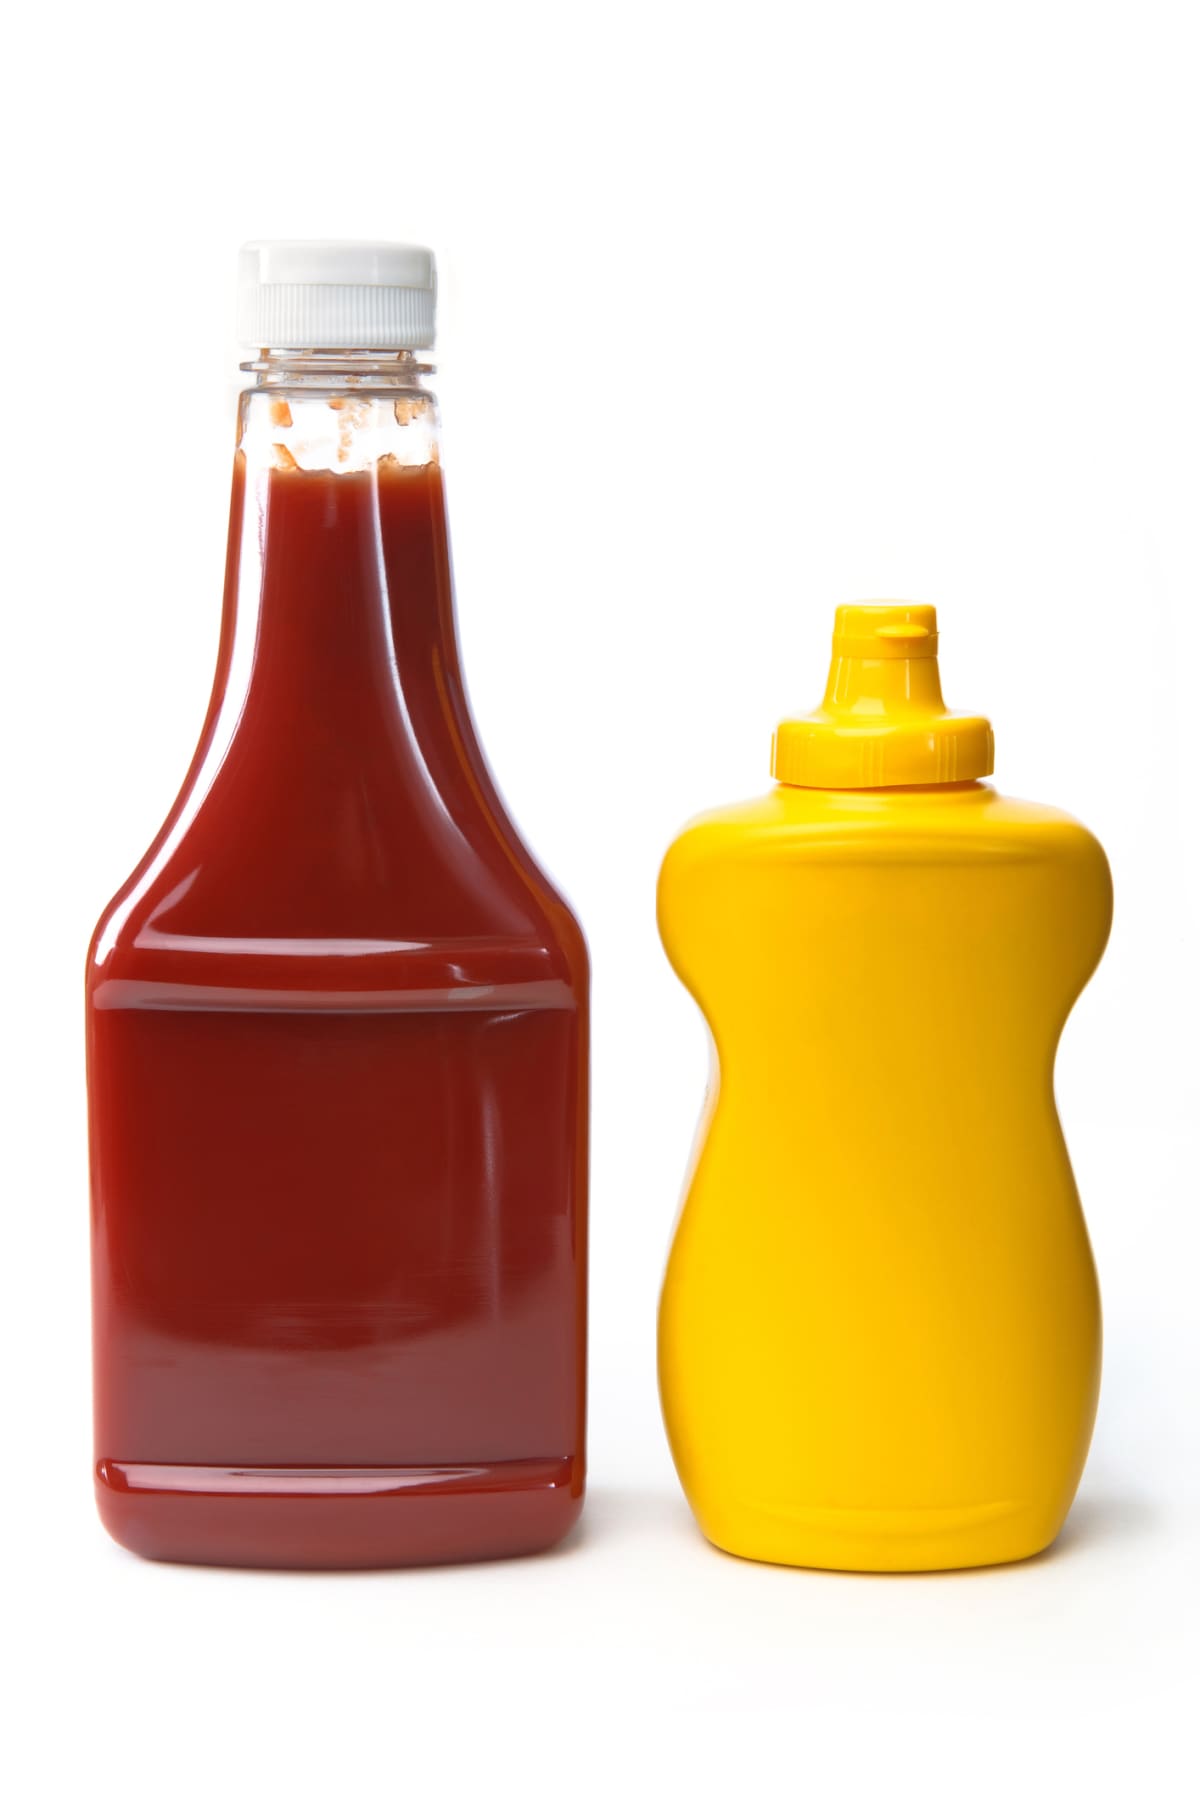 Ketchup and Mustard bottles on white background